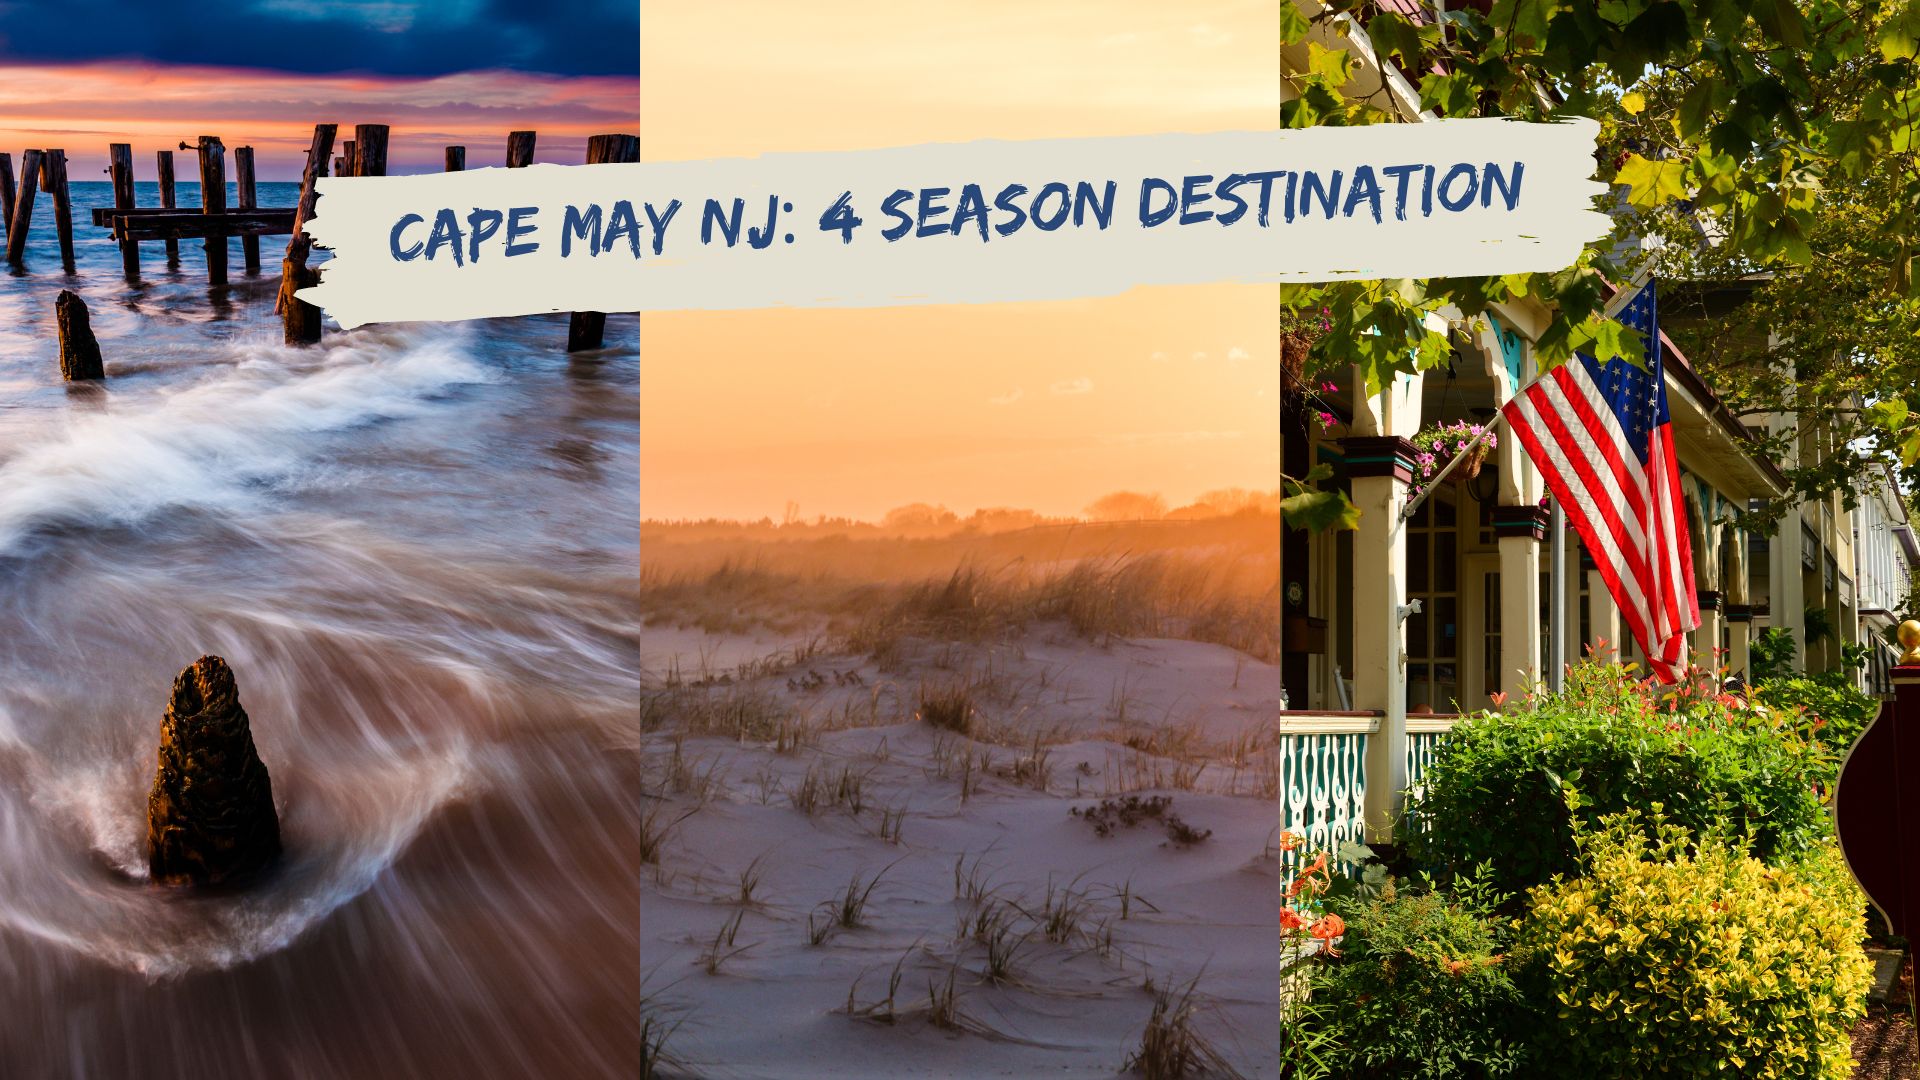 3 pictures of Cape May: water swirling around pylons, sunrise at beach with snow, American flag on front porch of Victorian home. Text says, “Cape May NJ: 4 Season Destination.”